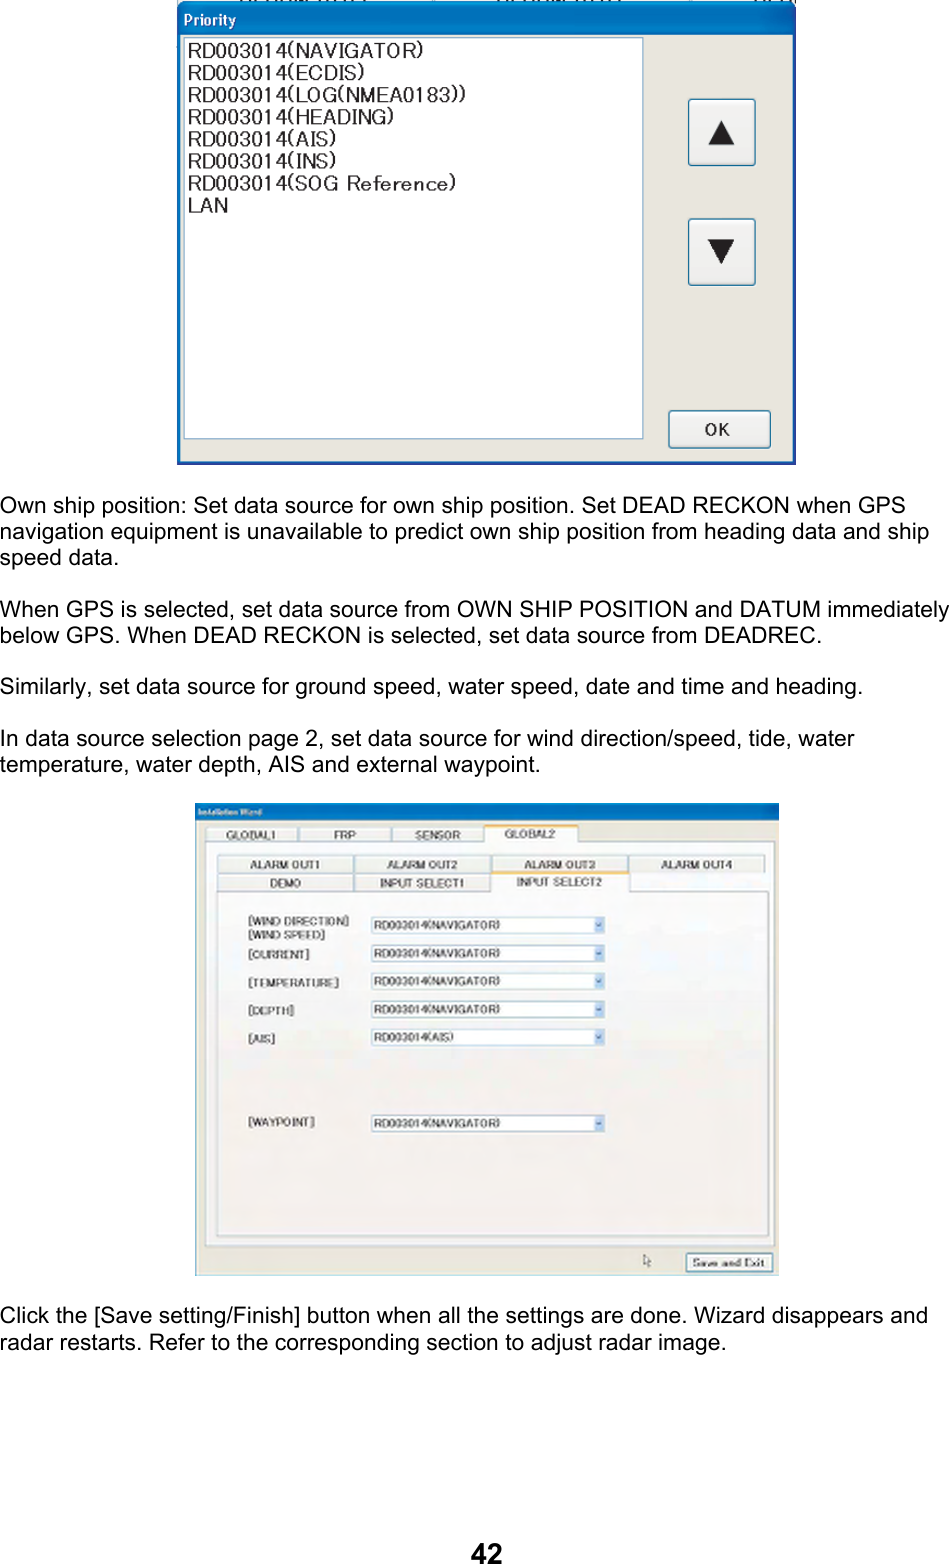  42 Own ship position: Set data source for own ship position. Set DEAD RECKON when GPS navigation equipment is unavailable to predict own ship position from heading data and ship speed data.  When GPS is selected, set data source from OWN SHIP POSITION and DATUM immediately below GPS. When DEAD RECKON is selected, set data source from DEADREC. Similarly, set data source for ground speed, water speed, date and time and heading. In data source selection page 2, set data source for wind direction/speed, tide, water temperature, water depth, AIS and external waypoint.  Click the [Save setting/Finish] button when all the settings are done. Wizard disappears and radar restarts. Refer to the corresponding section to adjust radar image. 